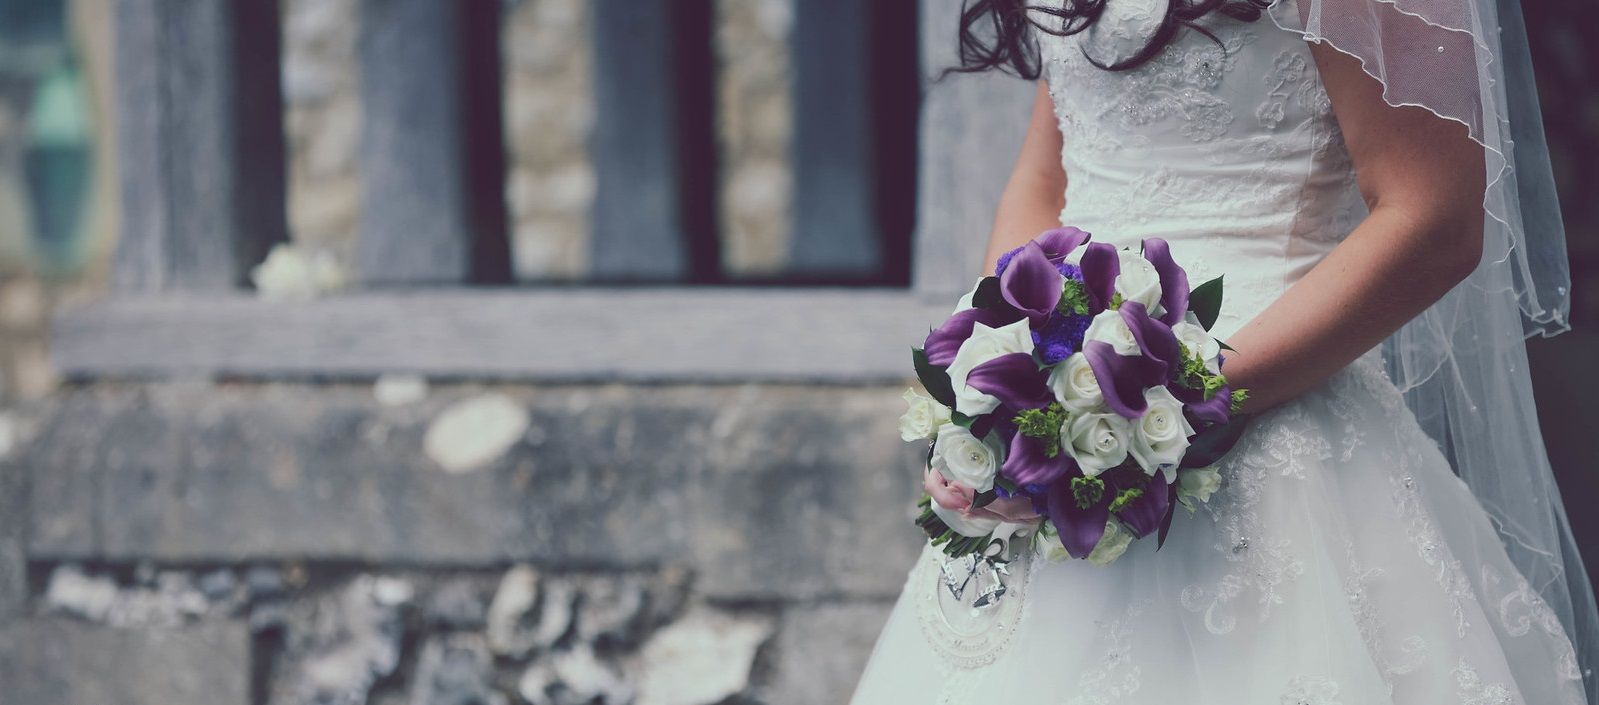 A bride holds a beatiful bouquet at a church wedding in Oxfordshire